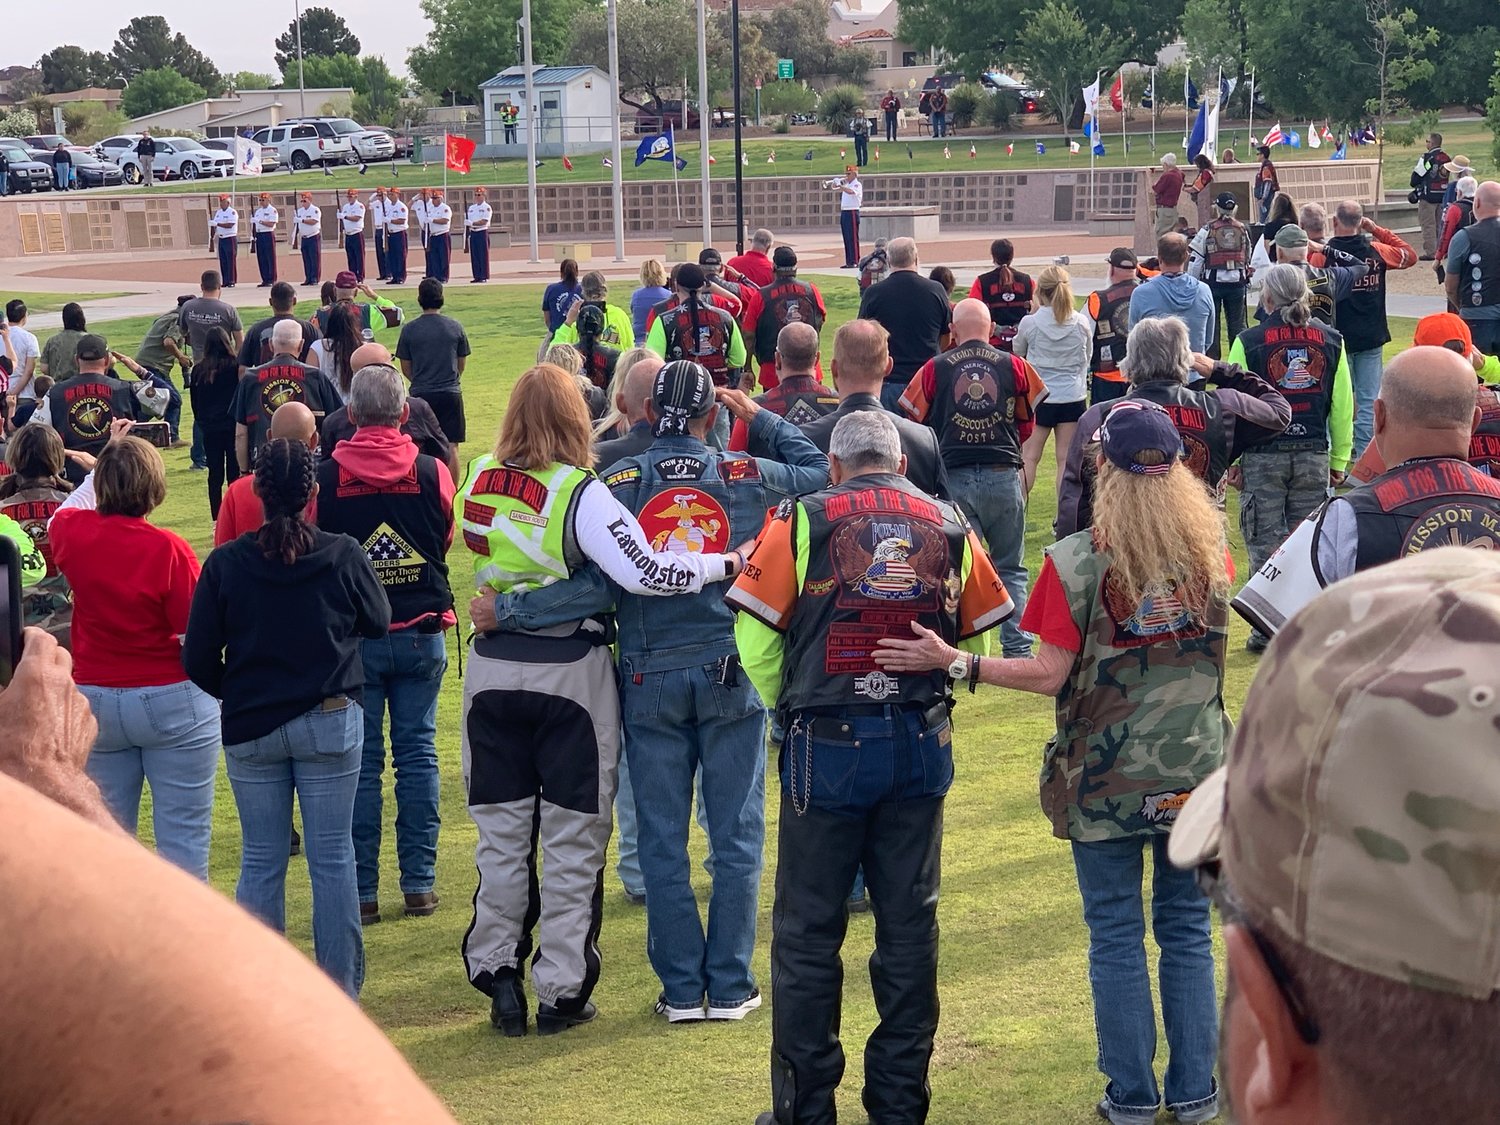 The haunting notes of taps float over Las Cruces Veterans Park as participants of the Run for the Wall cross-country motorcycle ride to Washington D.C. turn to honor the flag and say the Pledge of Allegiance.